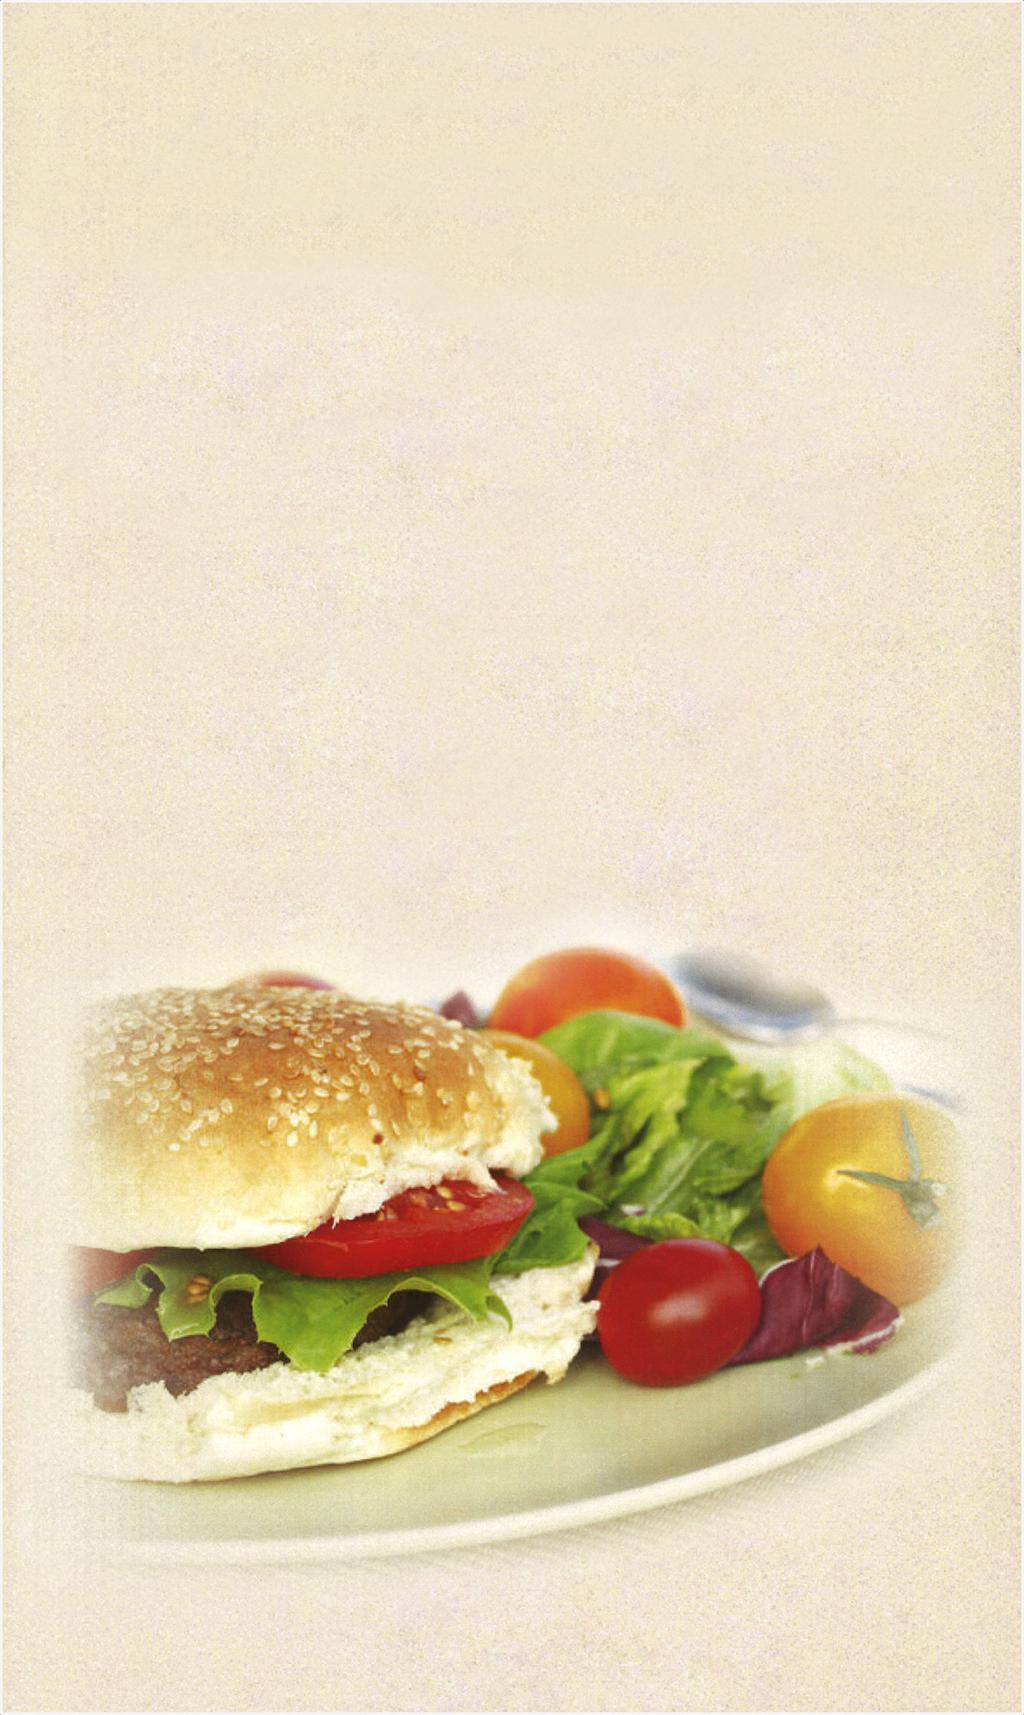 BURGERS All our burgers are served on a fresh sesame seed bun, and include mayonnaise, tomatoes, lettuce, onions and pickles. Include a choice of French fries, soup or salad.